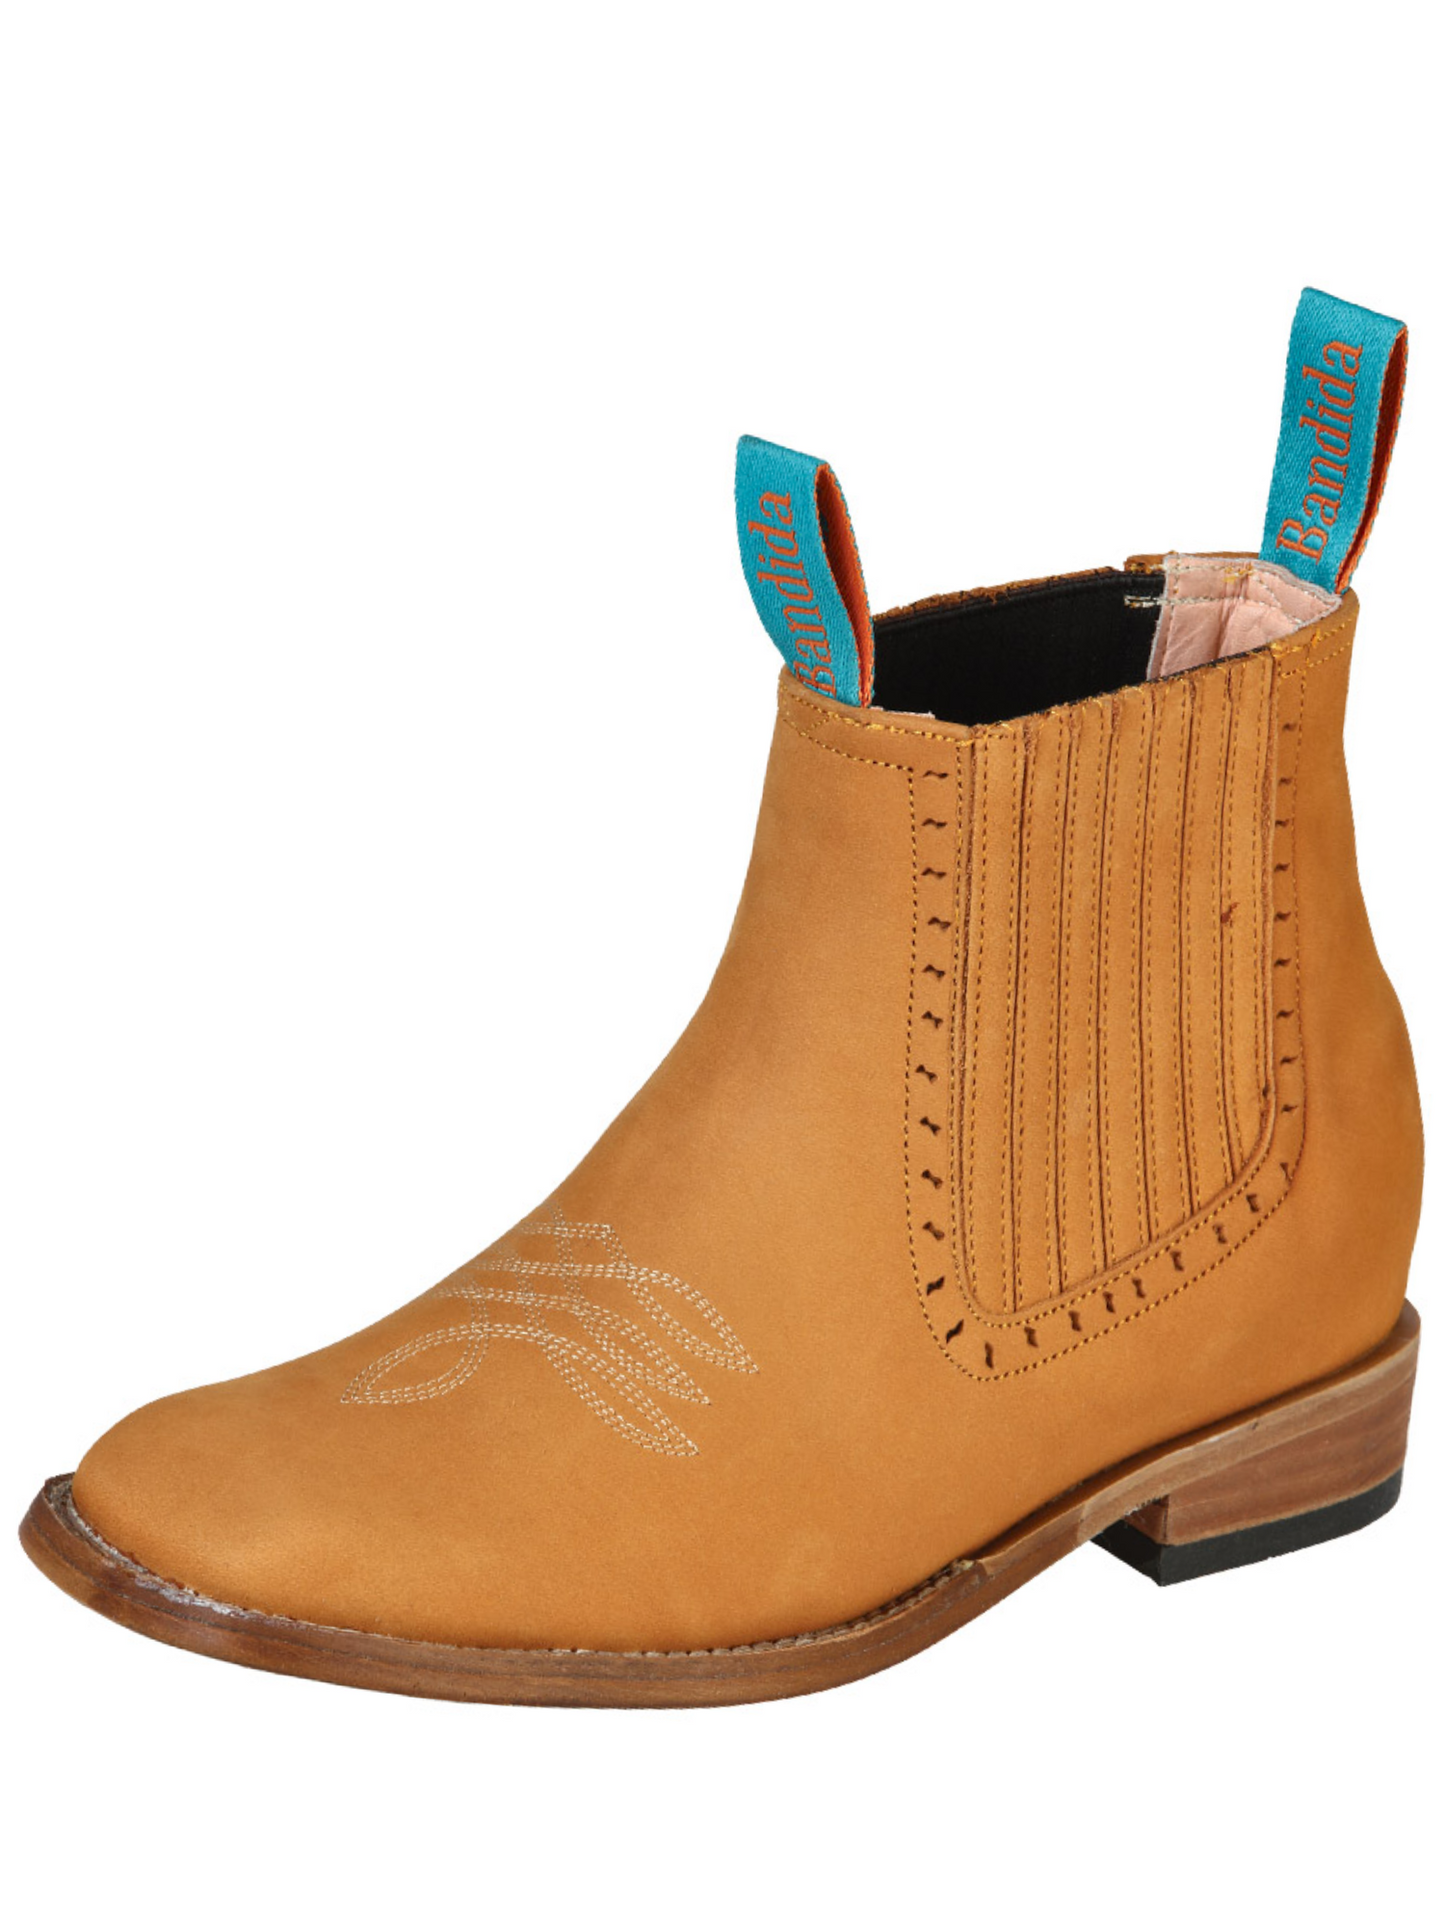 Classic Nubuck Leather Rodeo Cowboy Ankle Boots for Women 'La Barca' - ID: 126664 Western Ankle Boots La Barca Camel